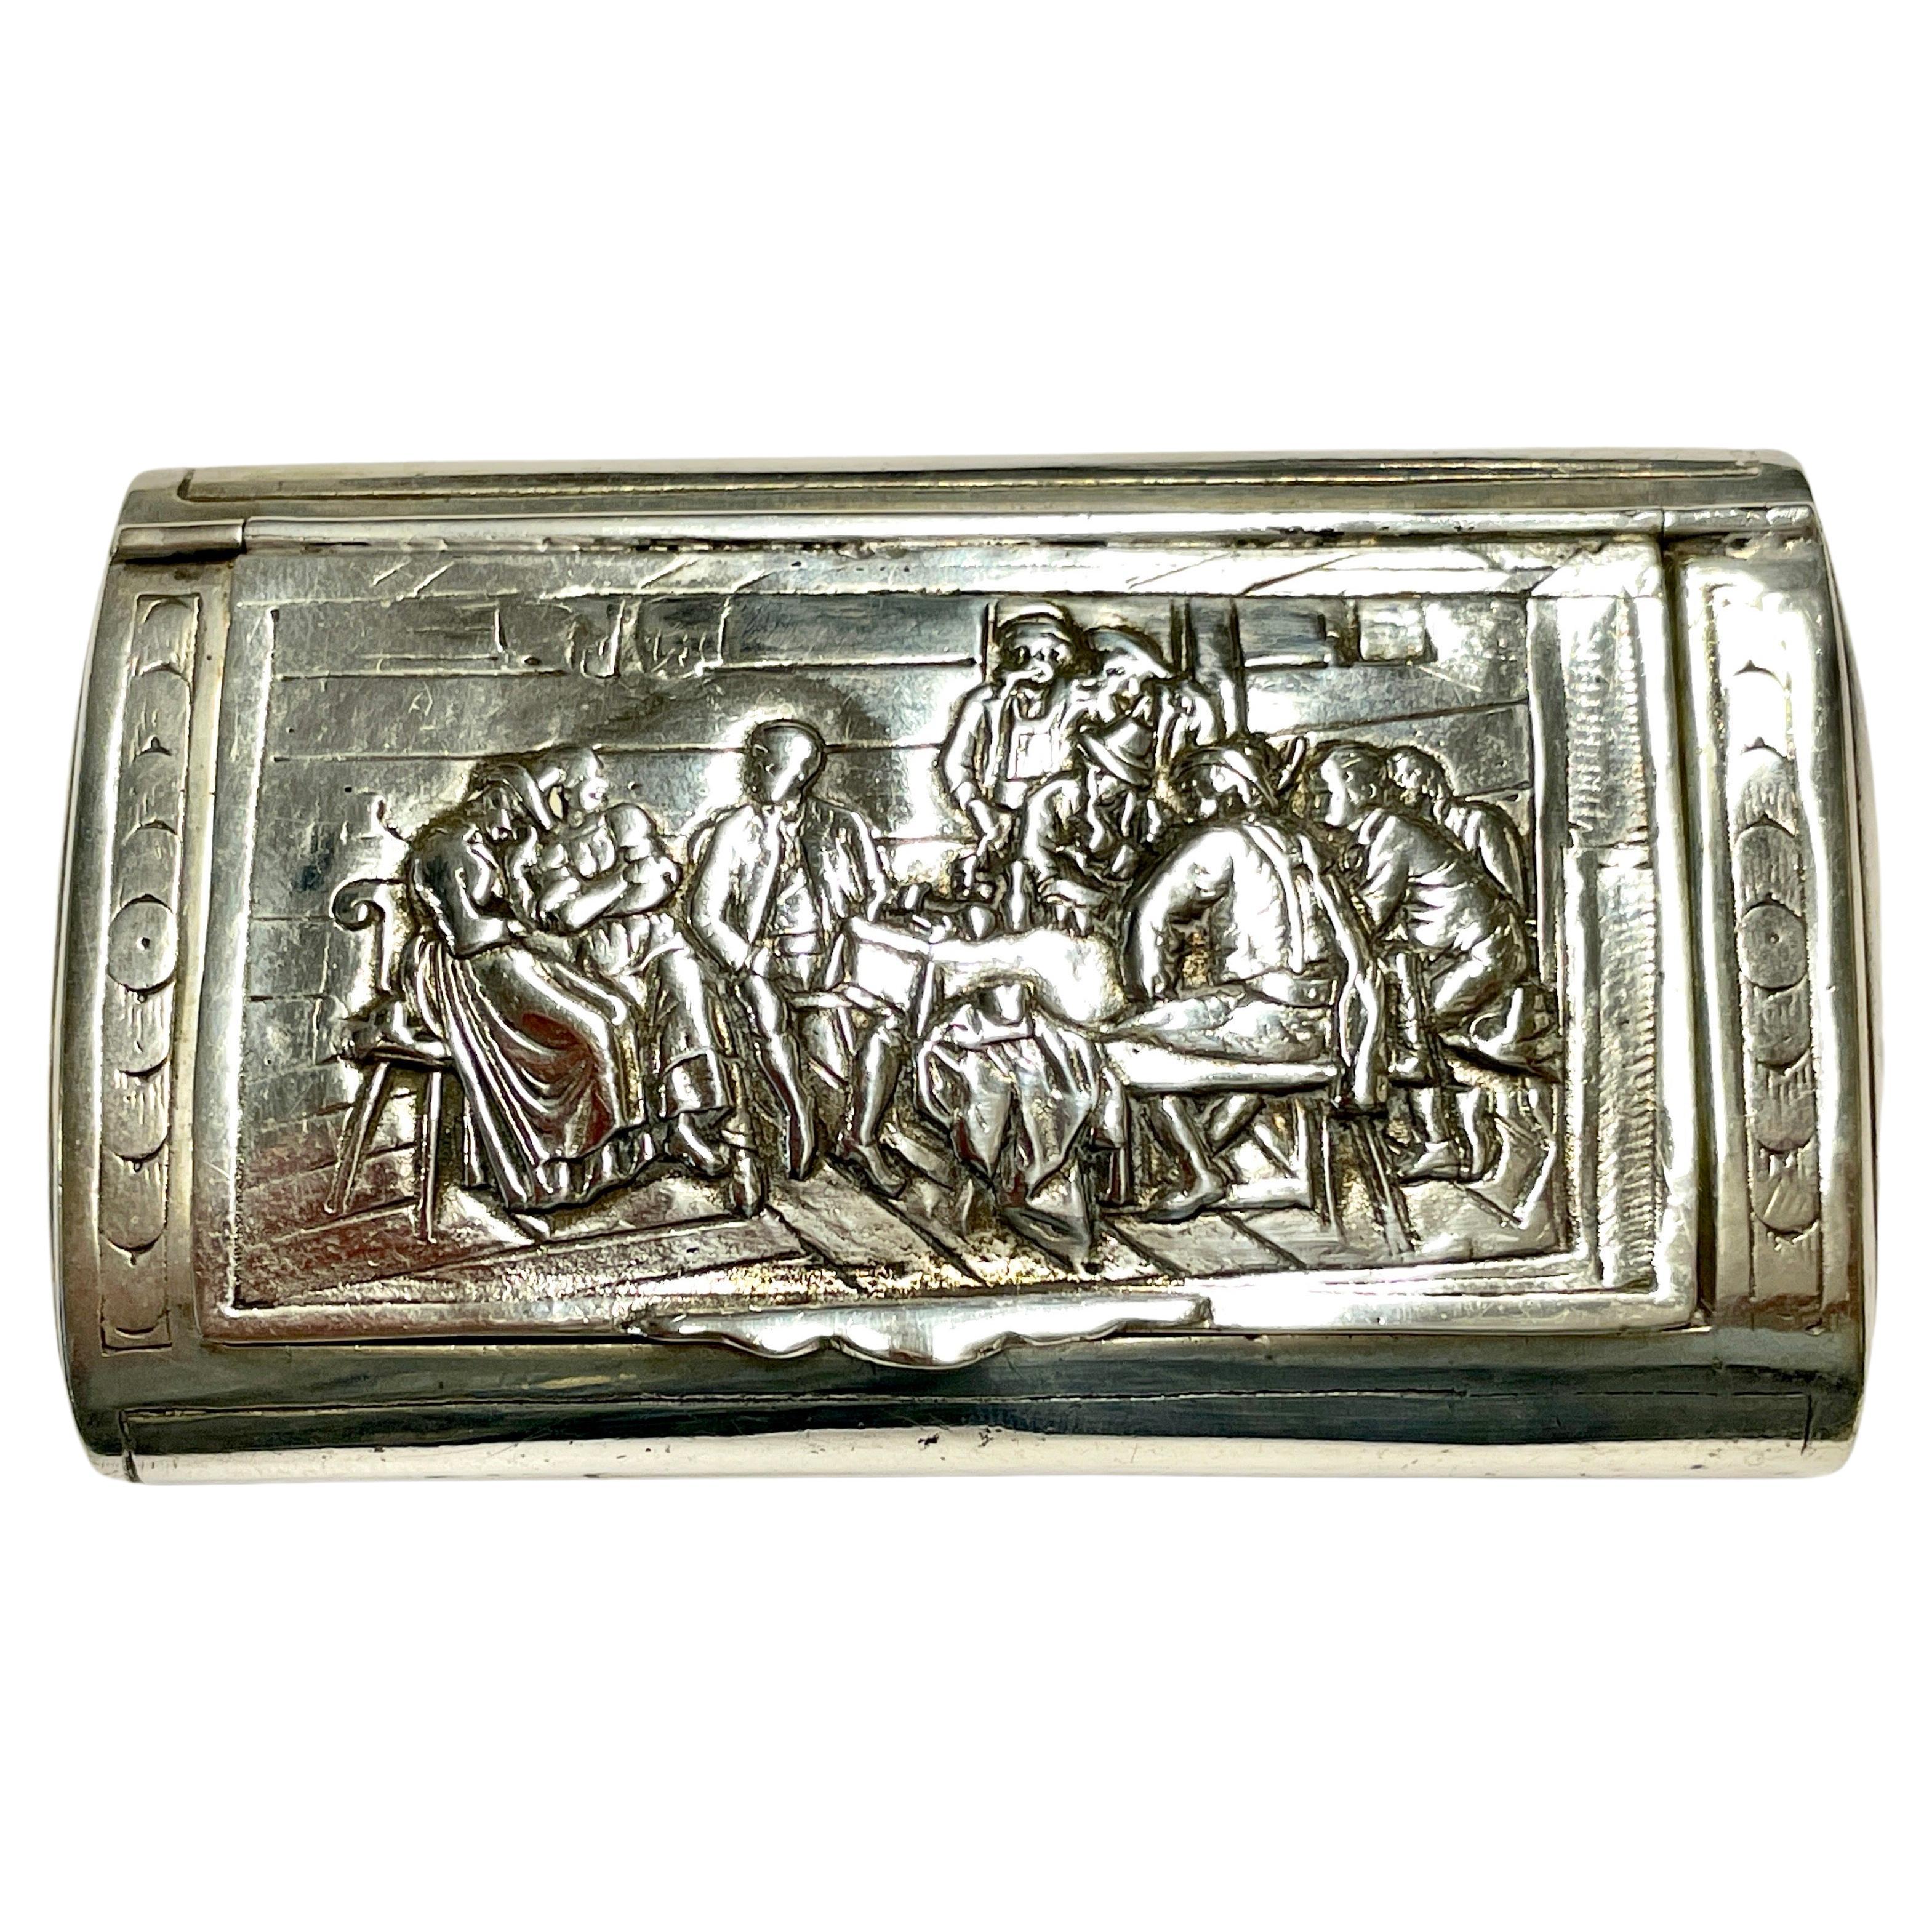 Antique Snuff Box, German, 800 Fine Silver, Hand Chased with a Smoking Pub Scene